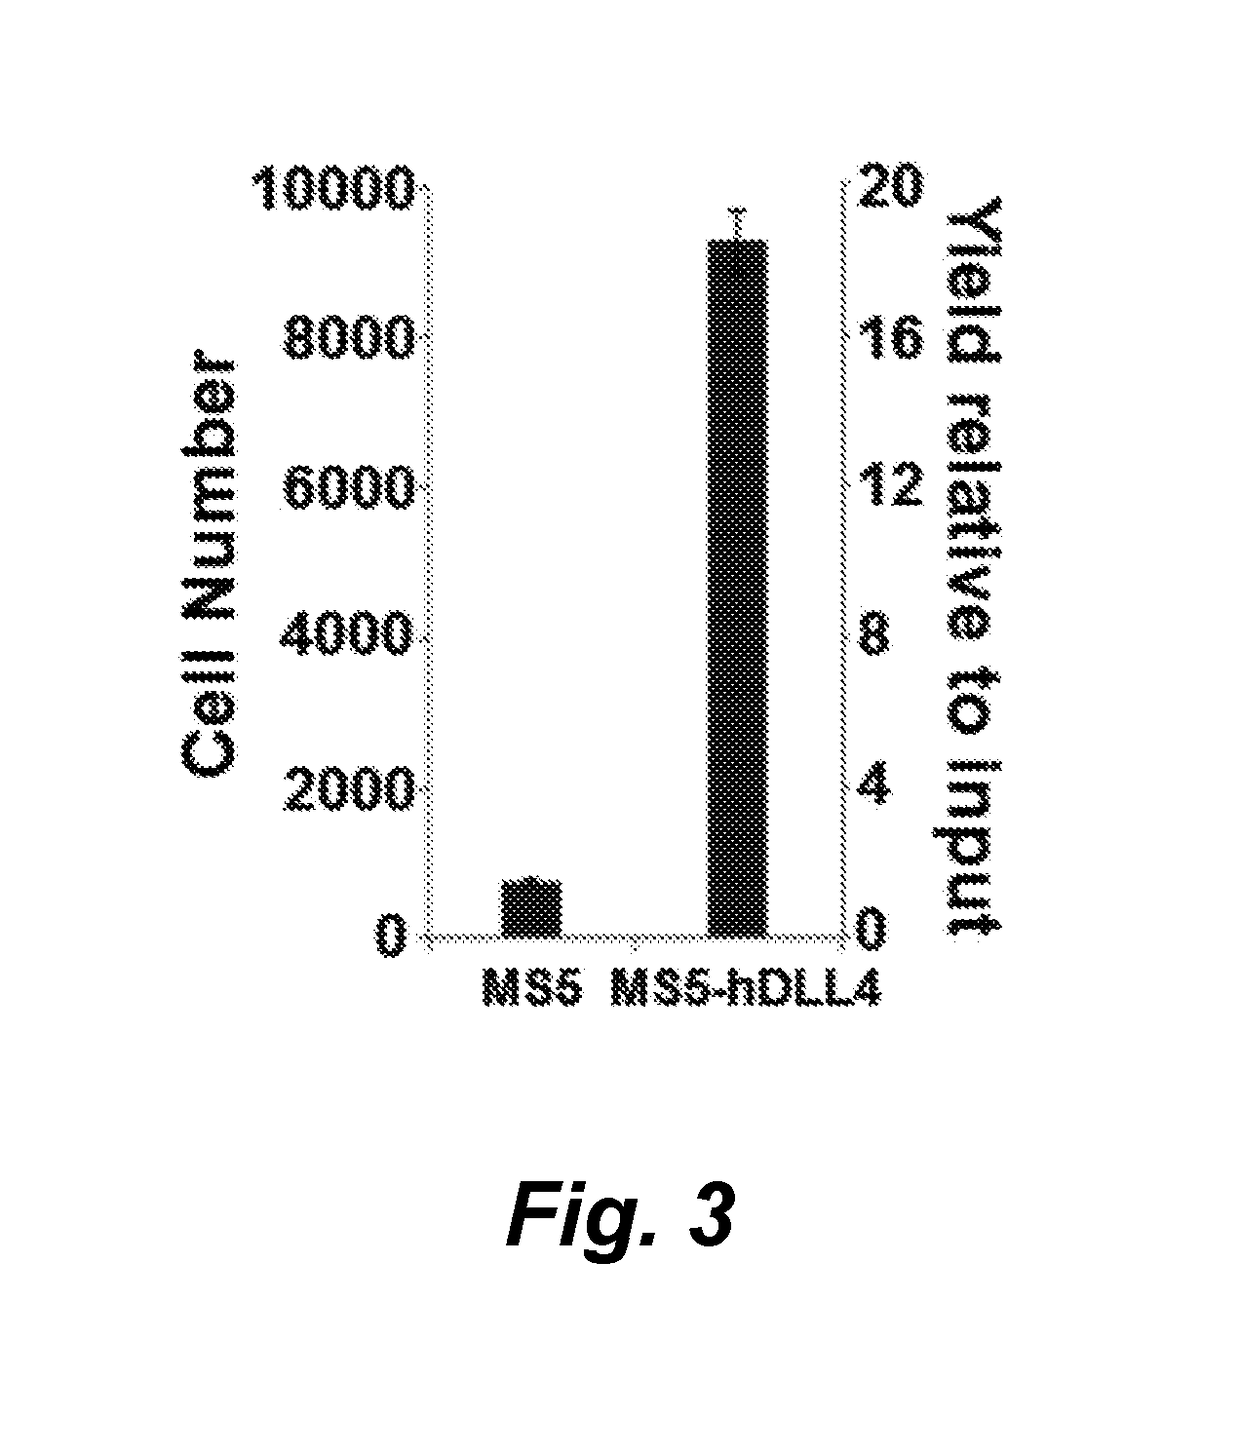 Method for generating human dendritic cells for immunotherapy